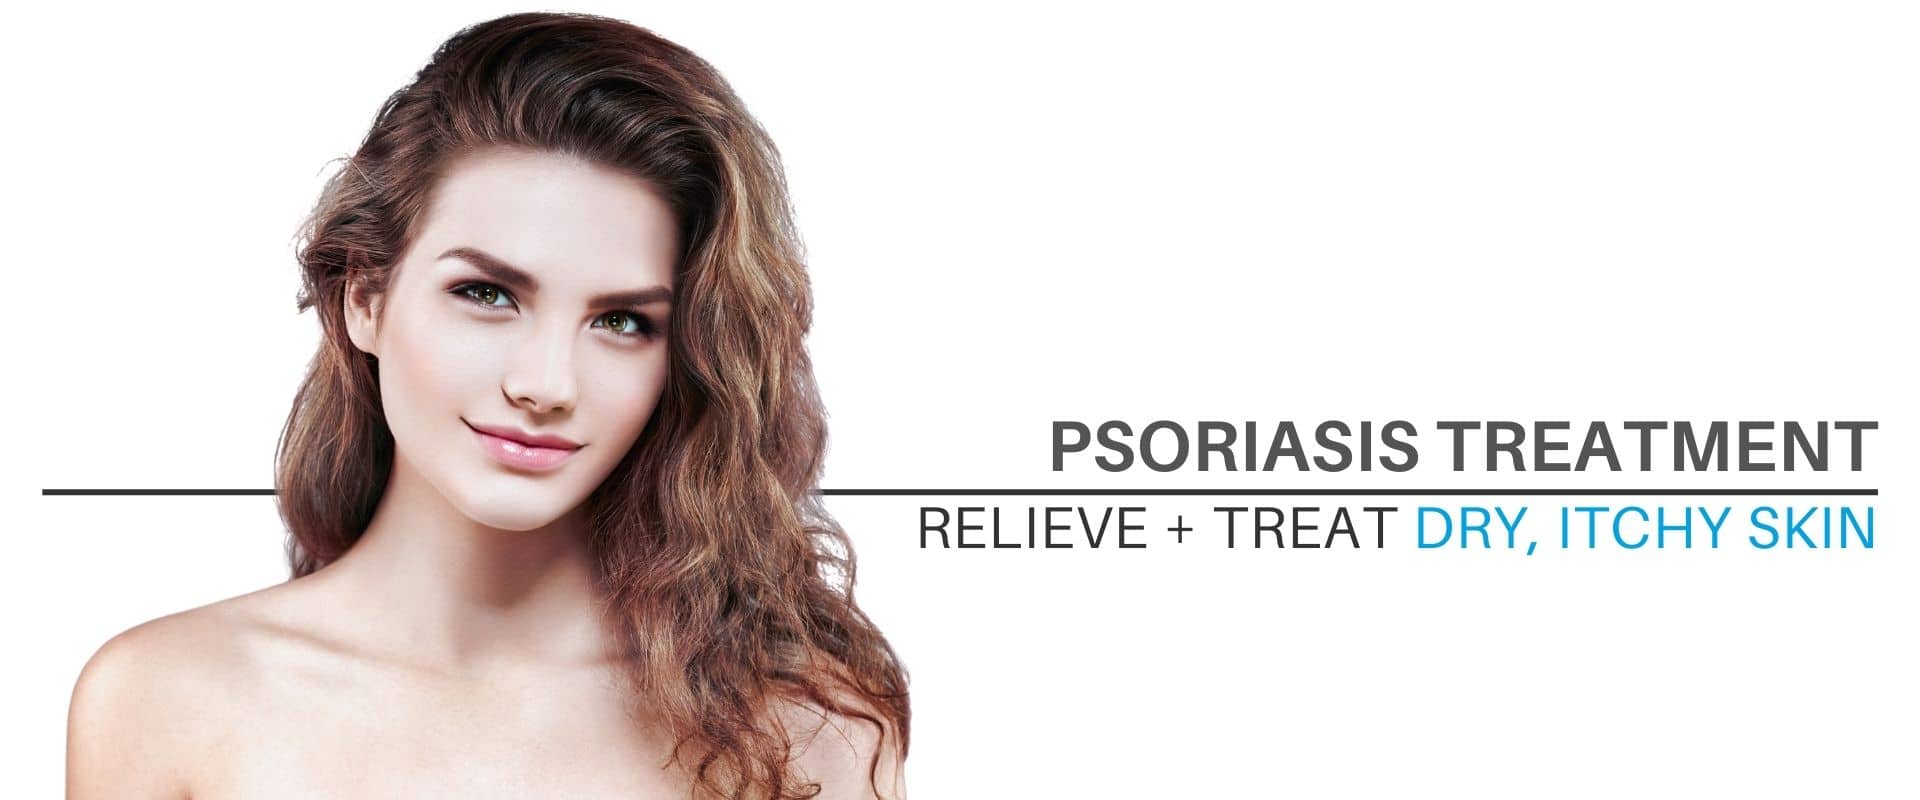 Woman with long hair and clear skin smiling after Psoriasis treatment.